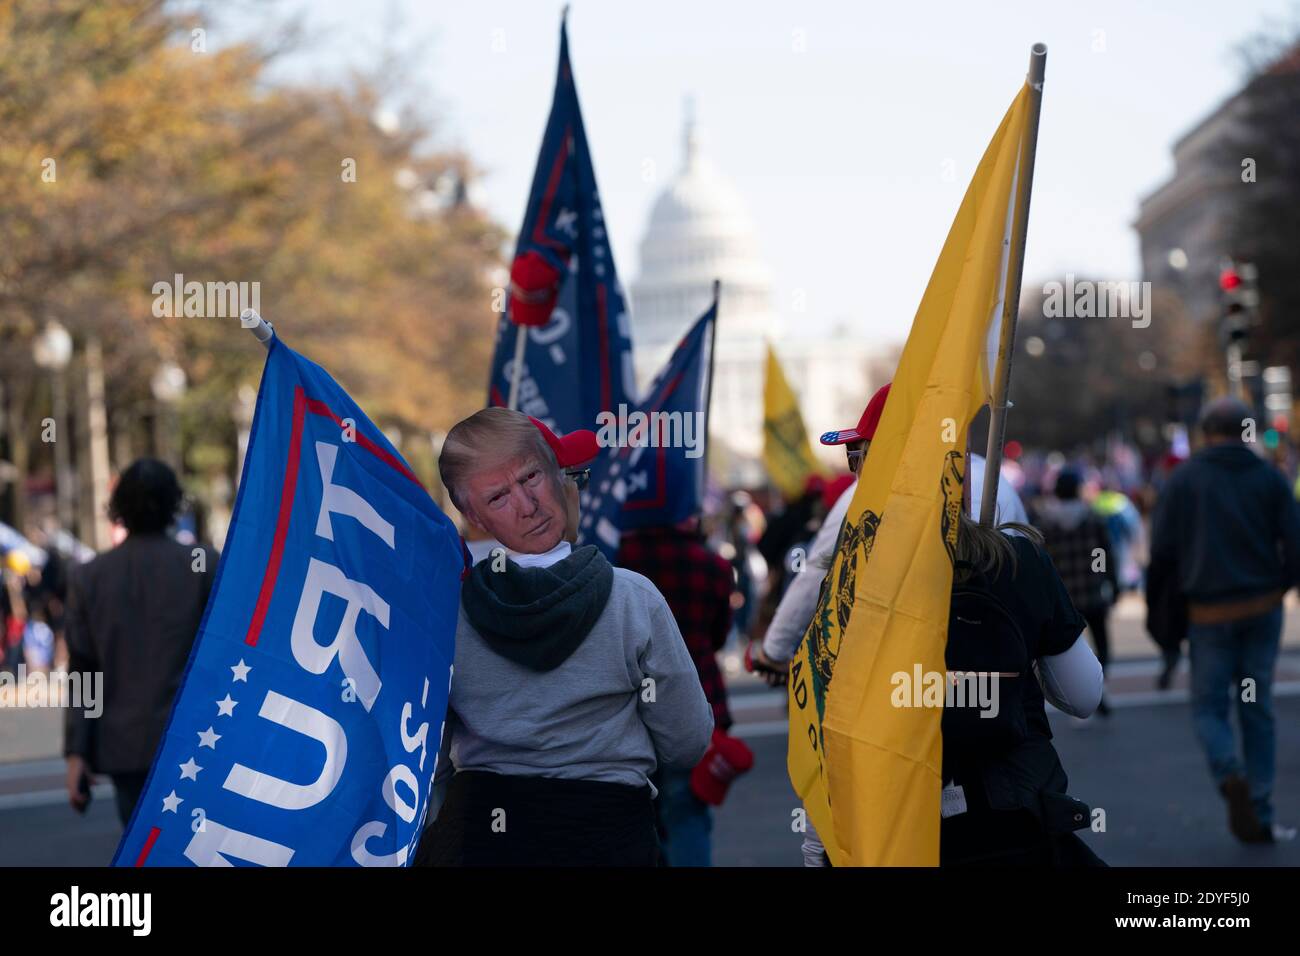 Demonstrators gather during the 'Million MAGA March' at Freedom Plaza in Washington, D.C., U.S., on Saturday, Nov. 14, 2020. The rally comes one week after news organizations projected Joe Biden as the winner of the 2020 election and President Trumps refusal to acknowledge he lost. Credit: Alex Edelman/The Photo Access Stock Photo